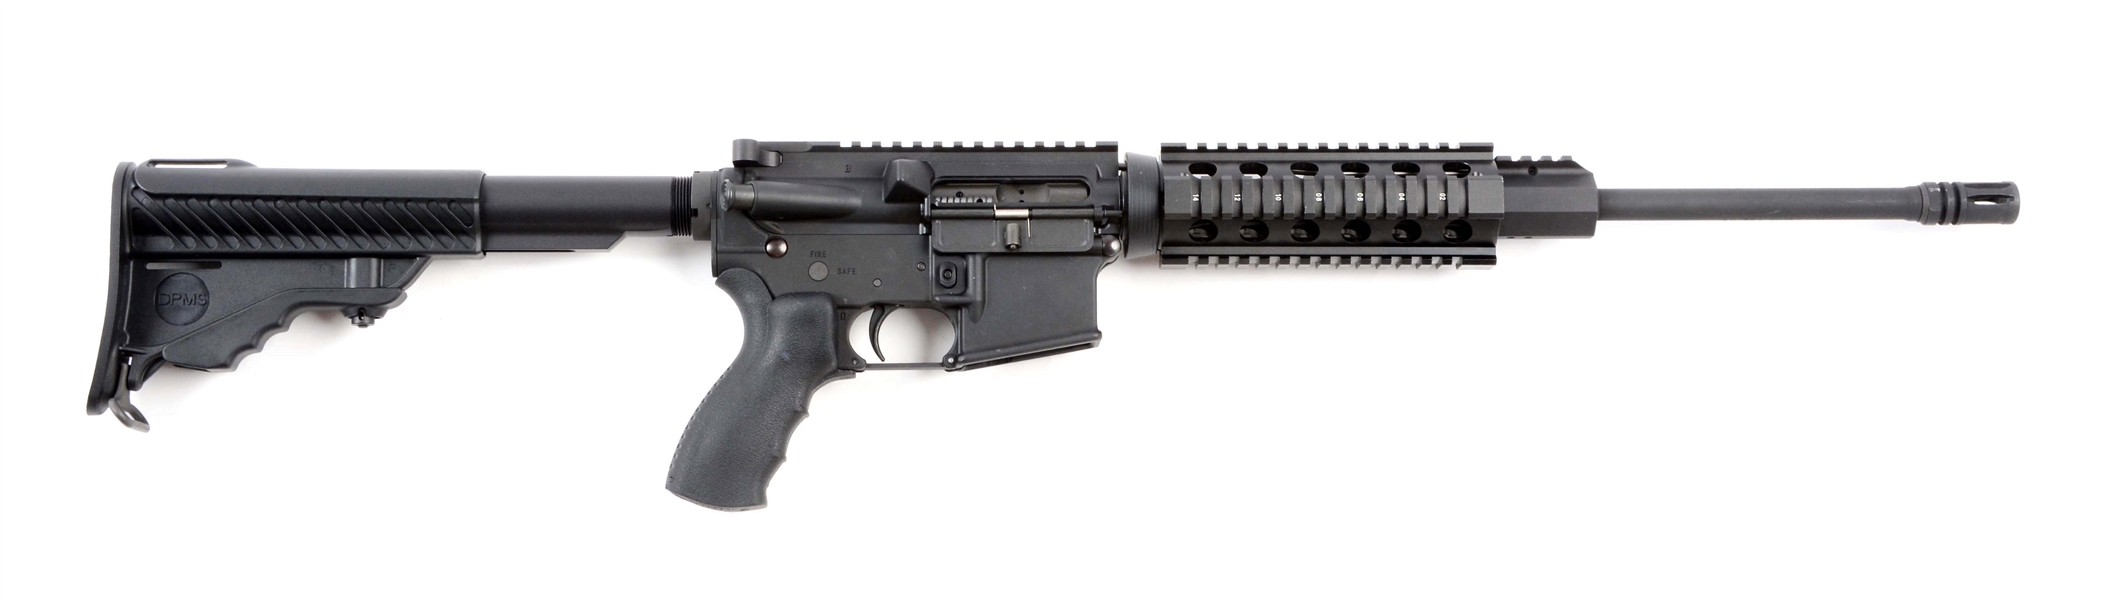 (M) DPMS PANTHER ARMS MODEL A-15 SEMI-AUTOMATIC RIFLE.